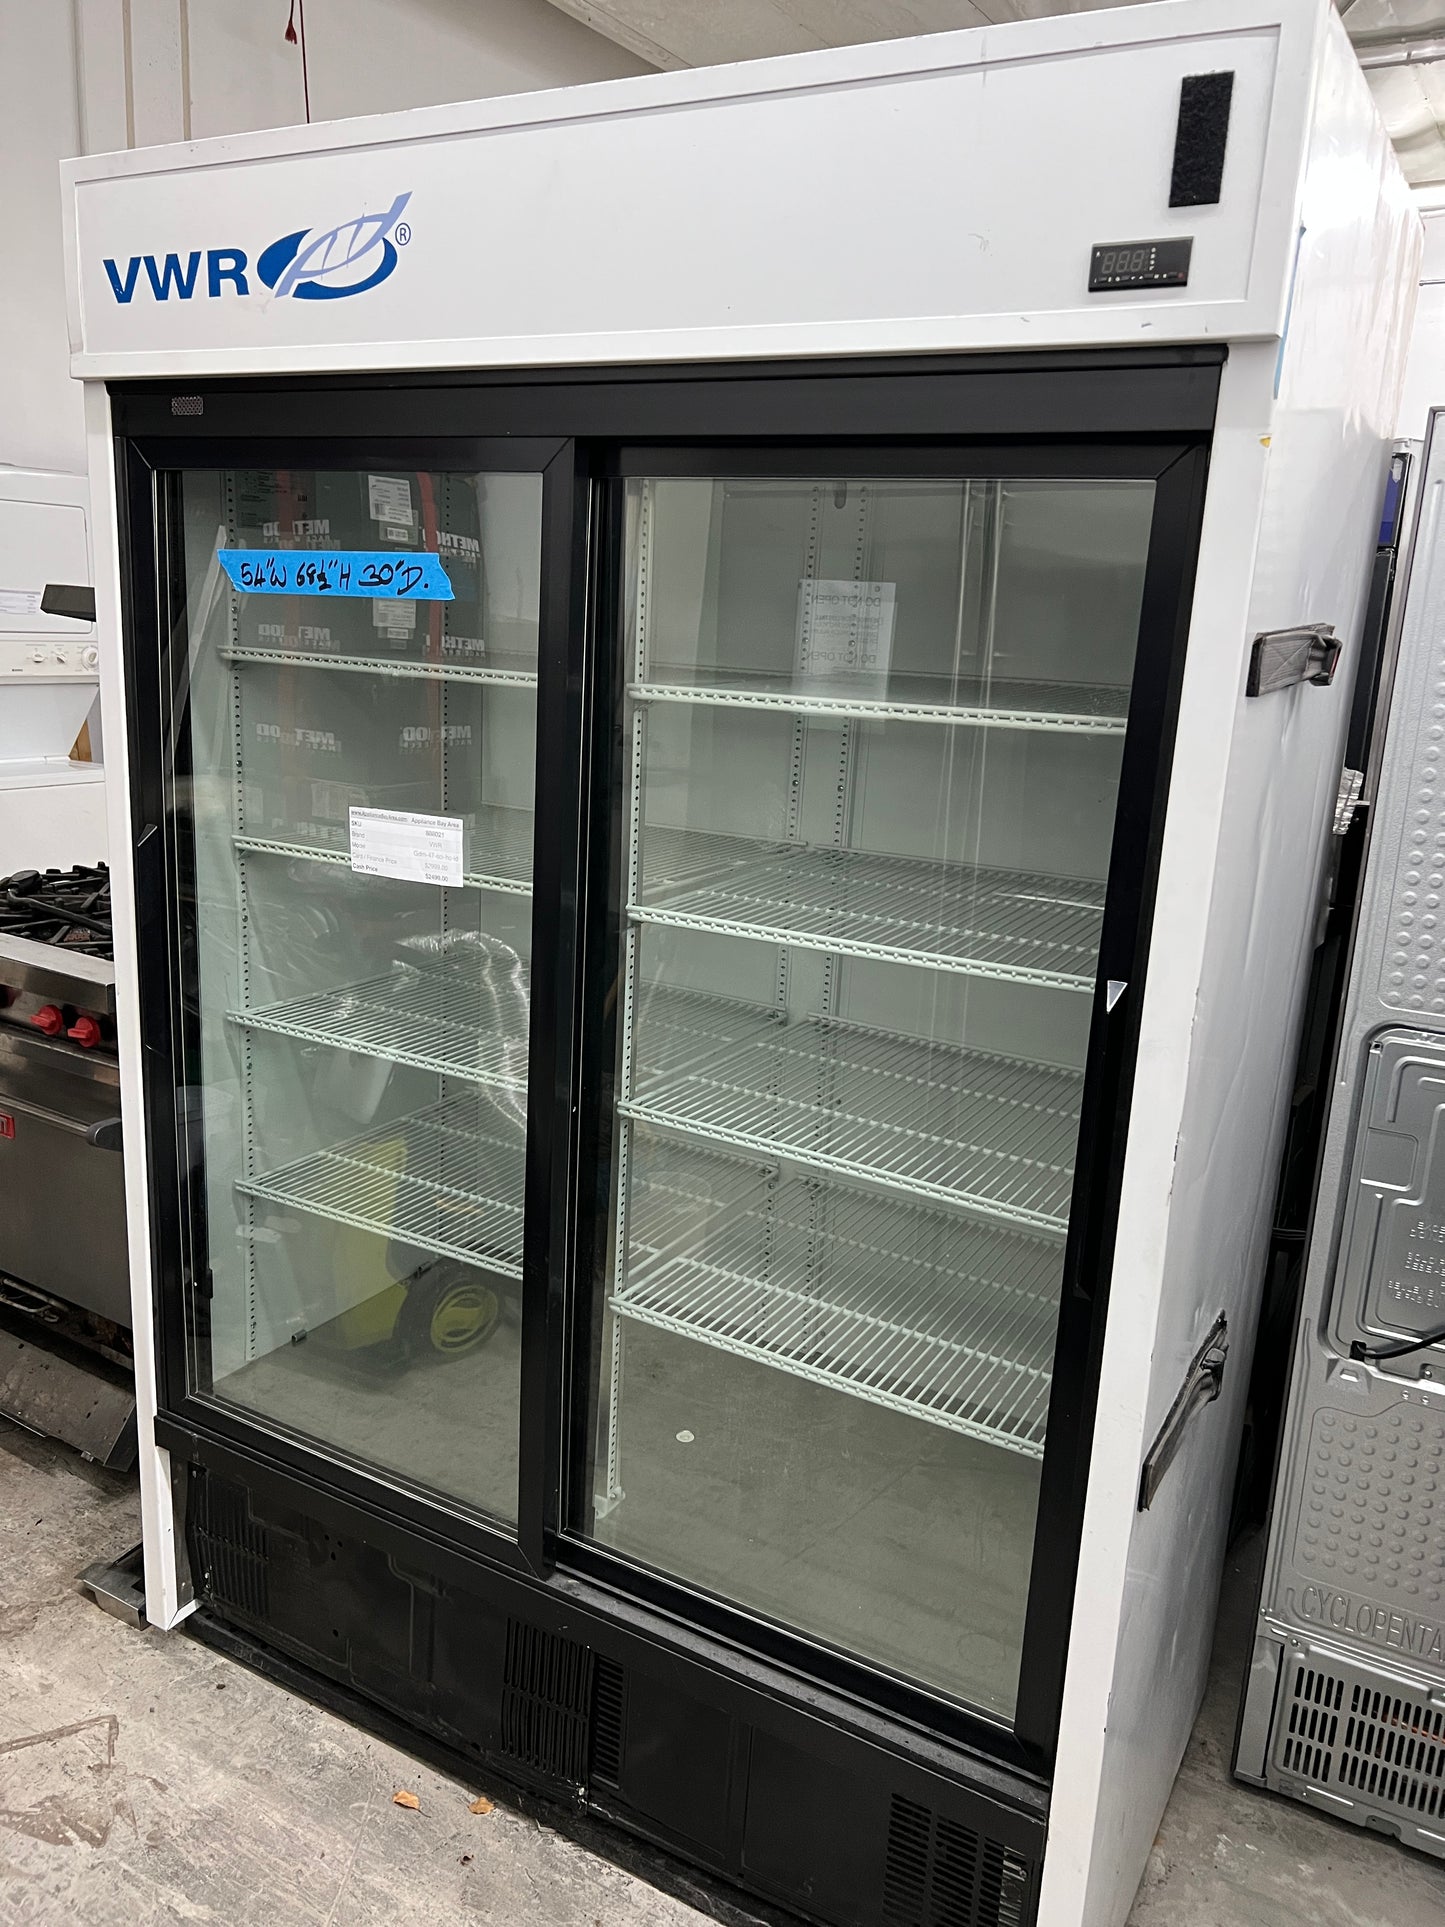 VWR 54 Inch Commercial Double See-Thru Glass Refrigerator GDM-47 -sci-hc-ld, For Restaurant, 888021